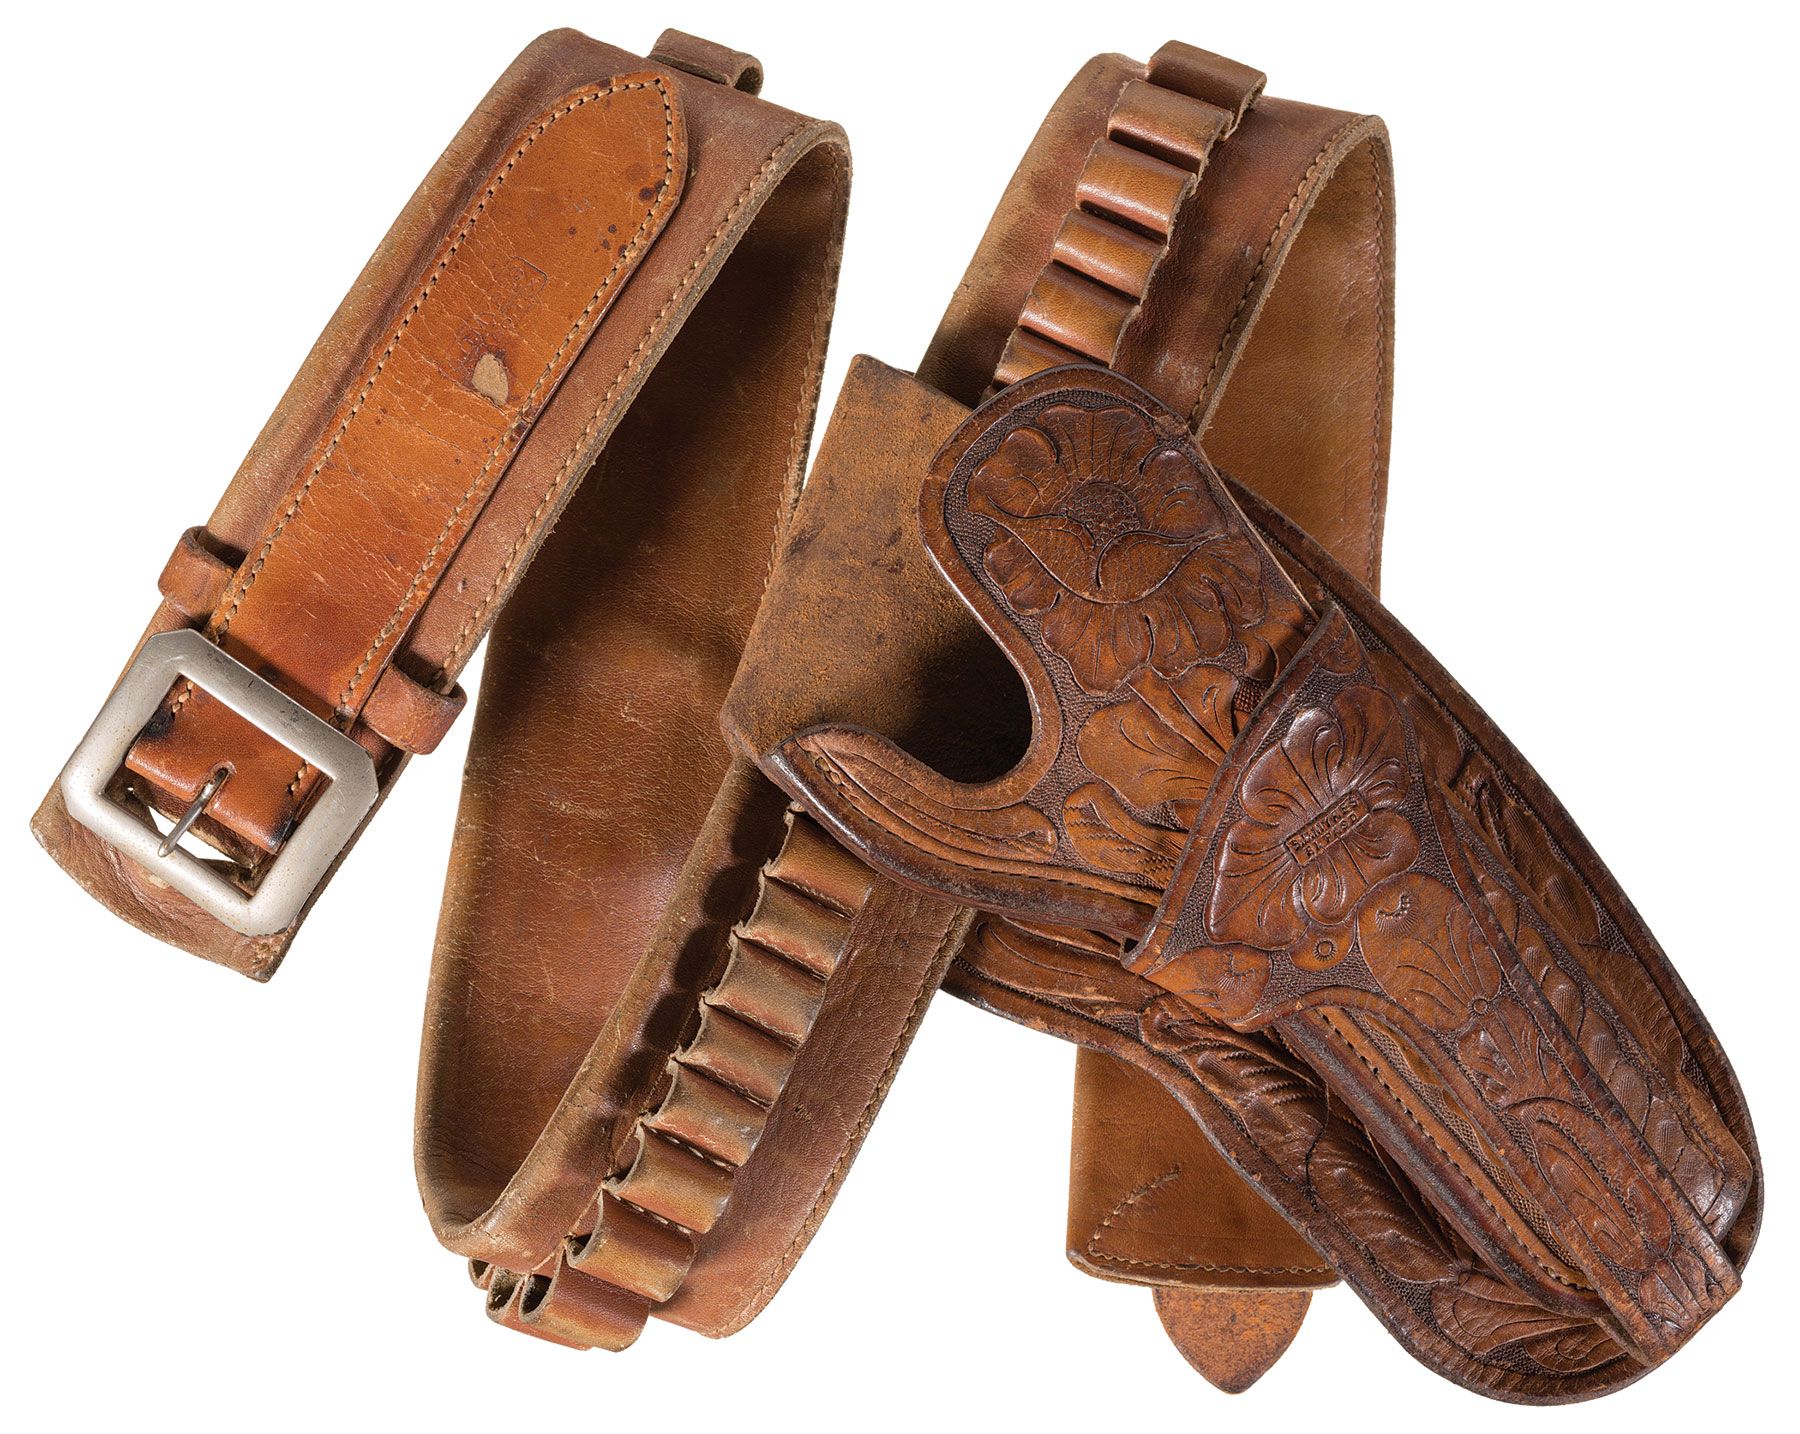 Sold at Auction: S. D. Meyers Saddle Co. Double Gun Belt of Texas